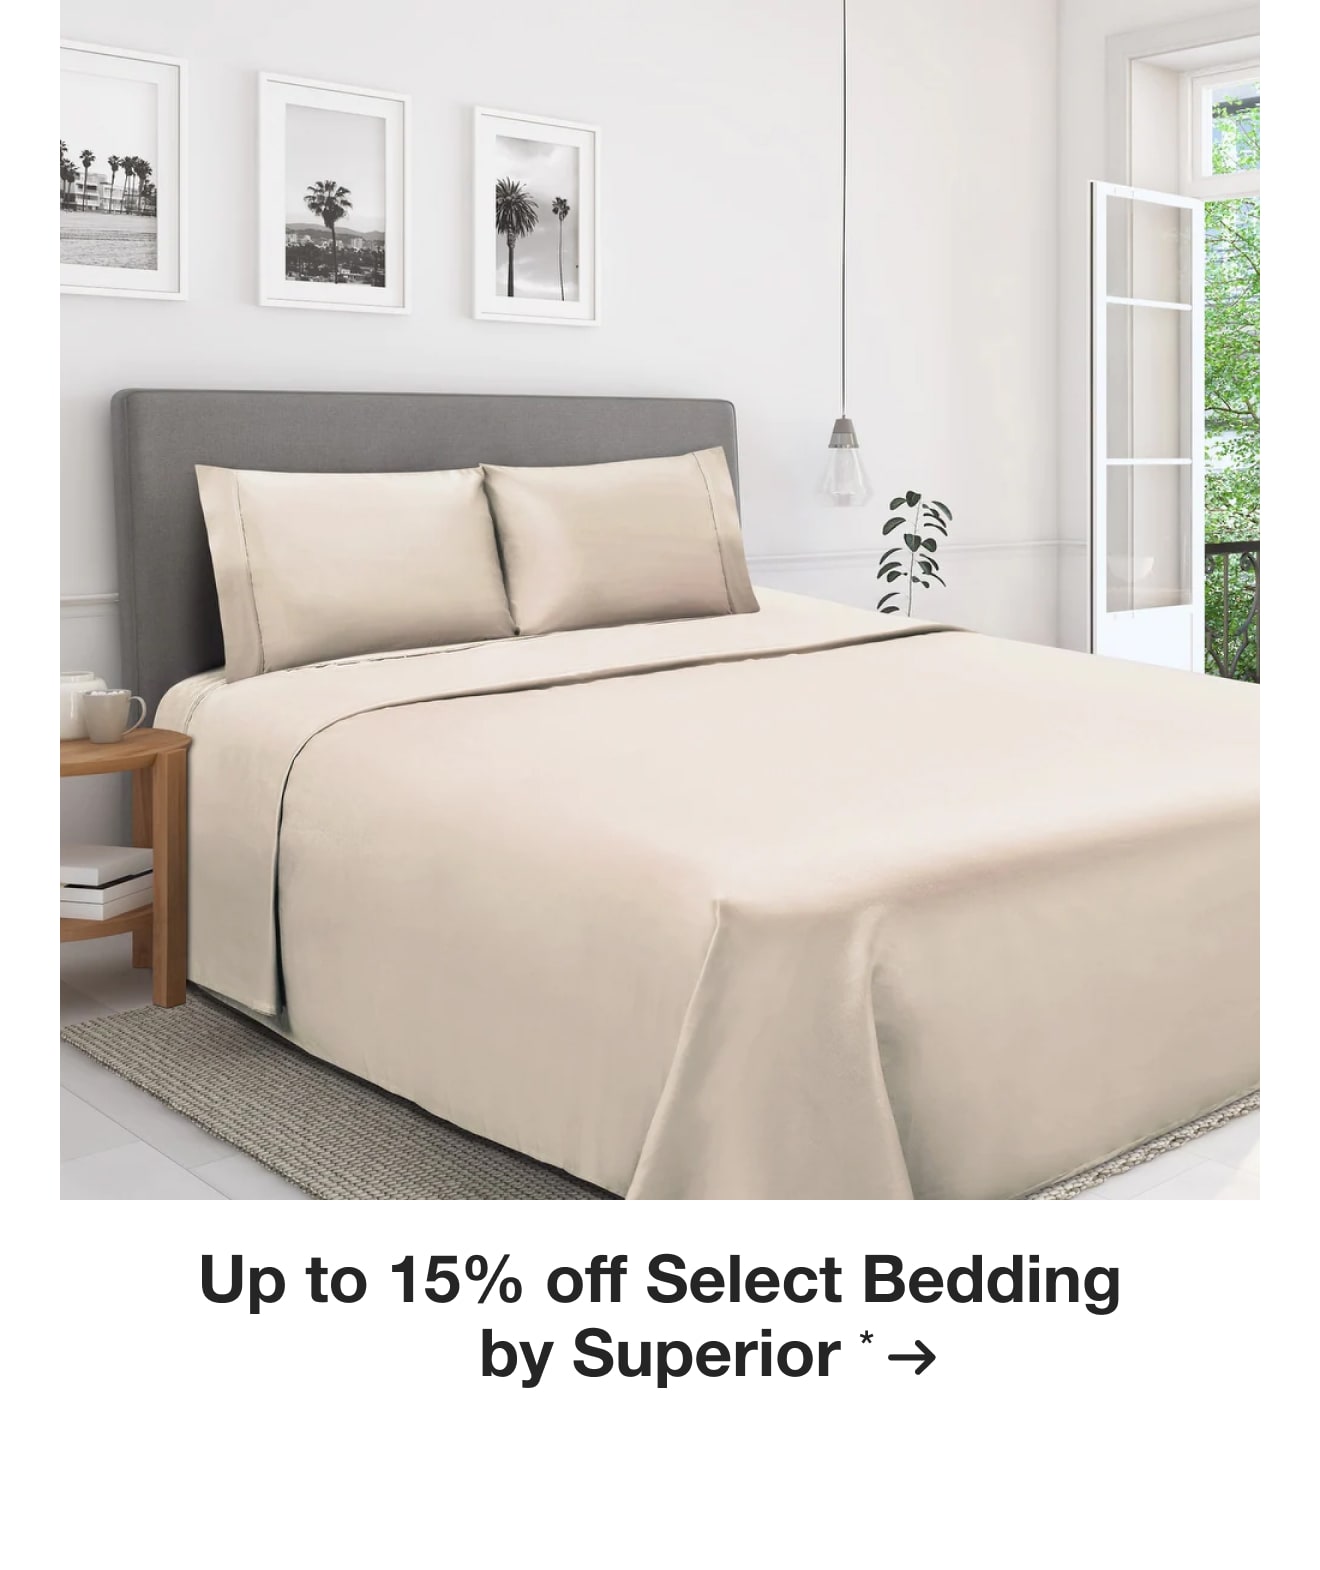 Up to 15% off Select Bedding by Superior*